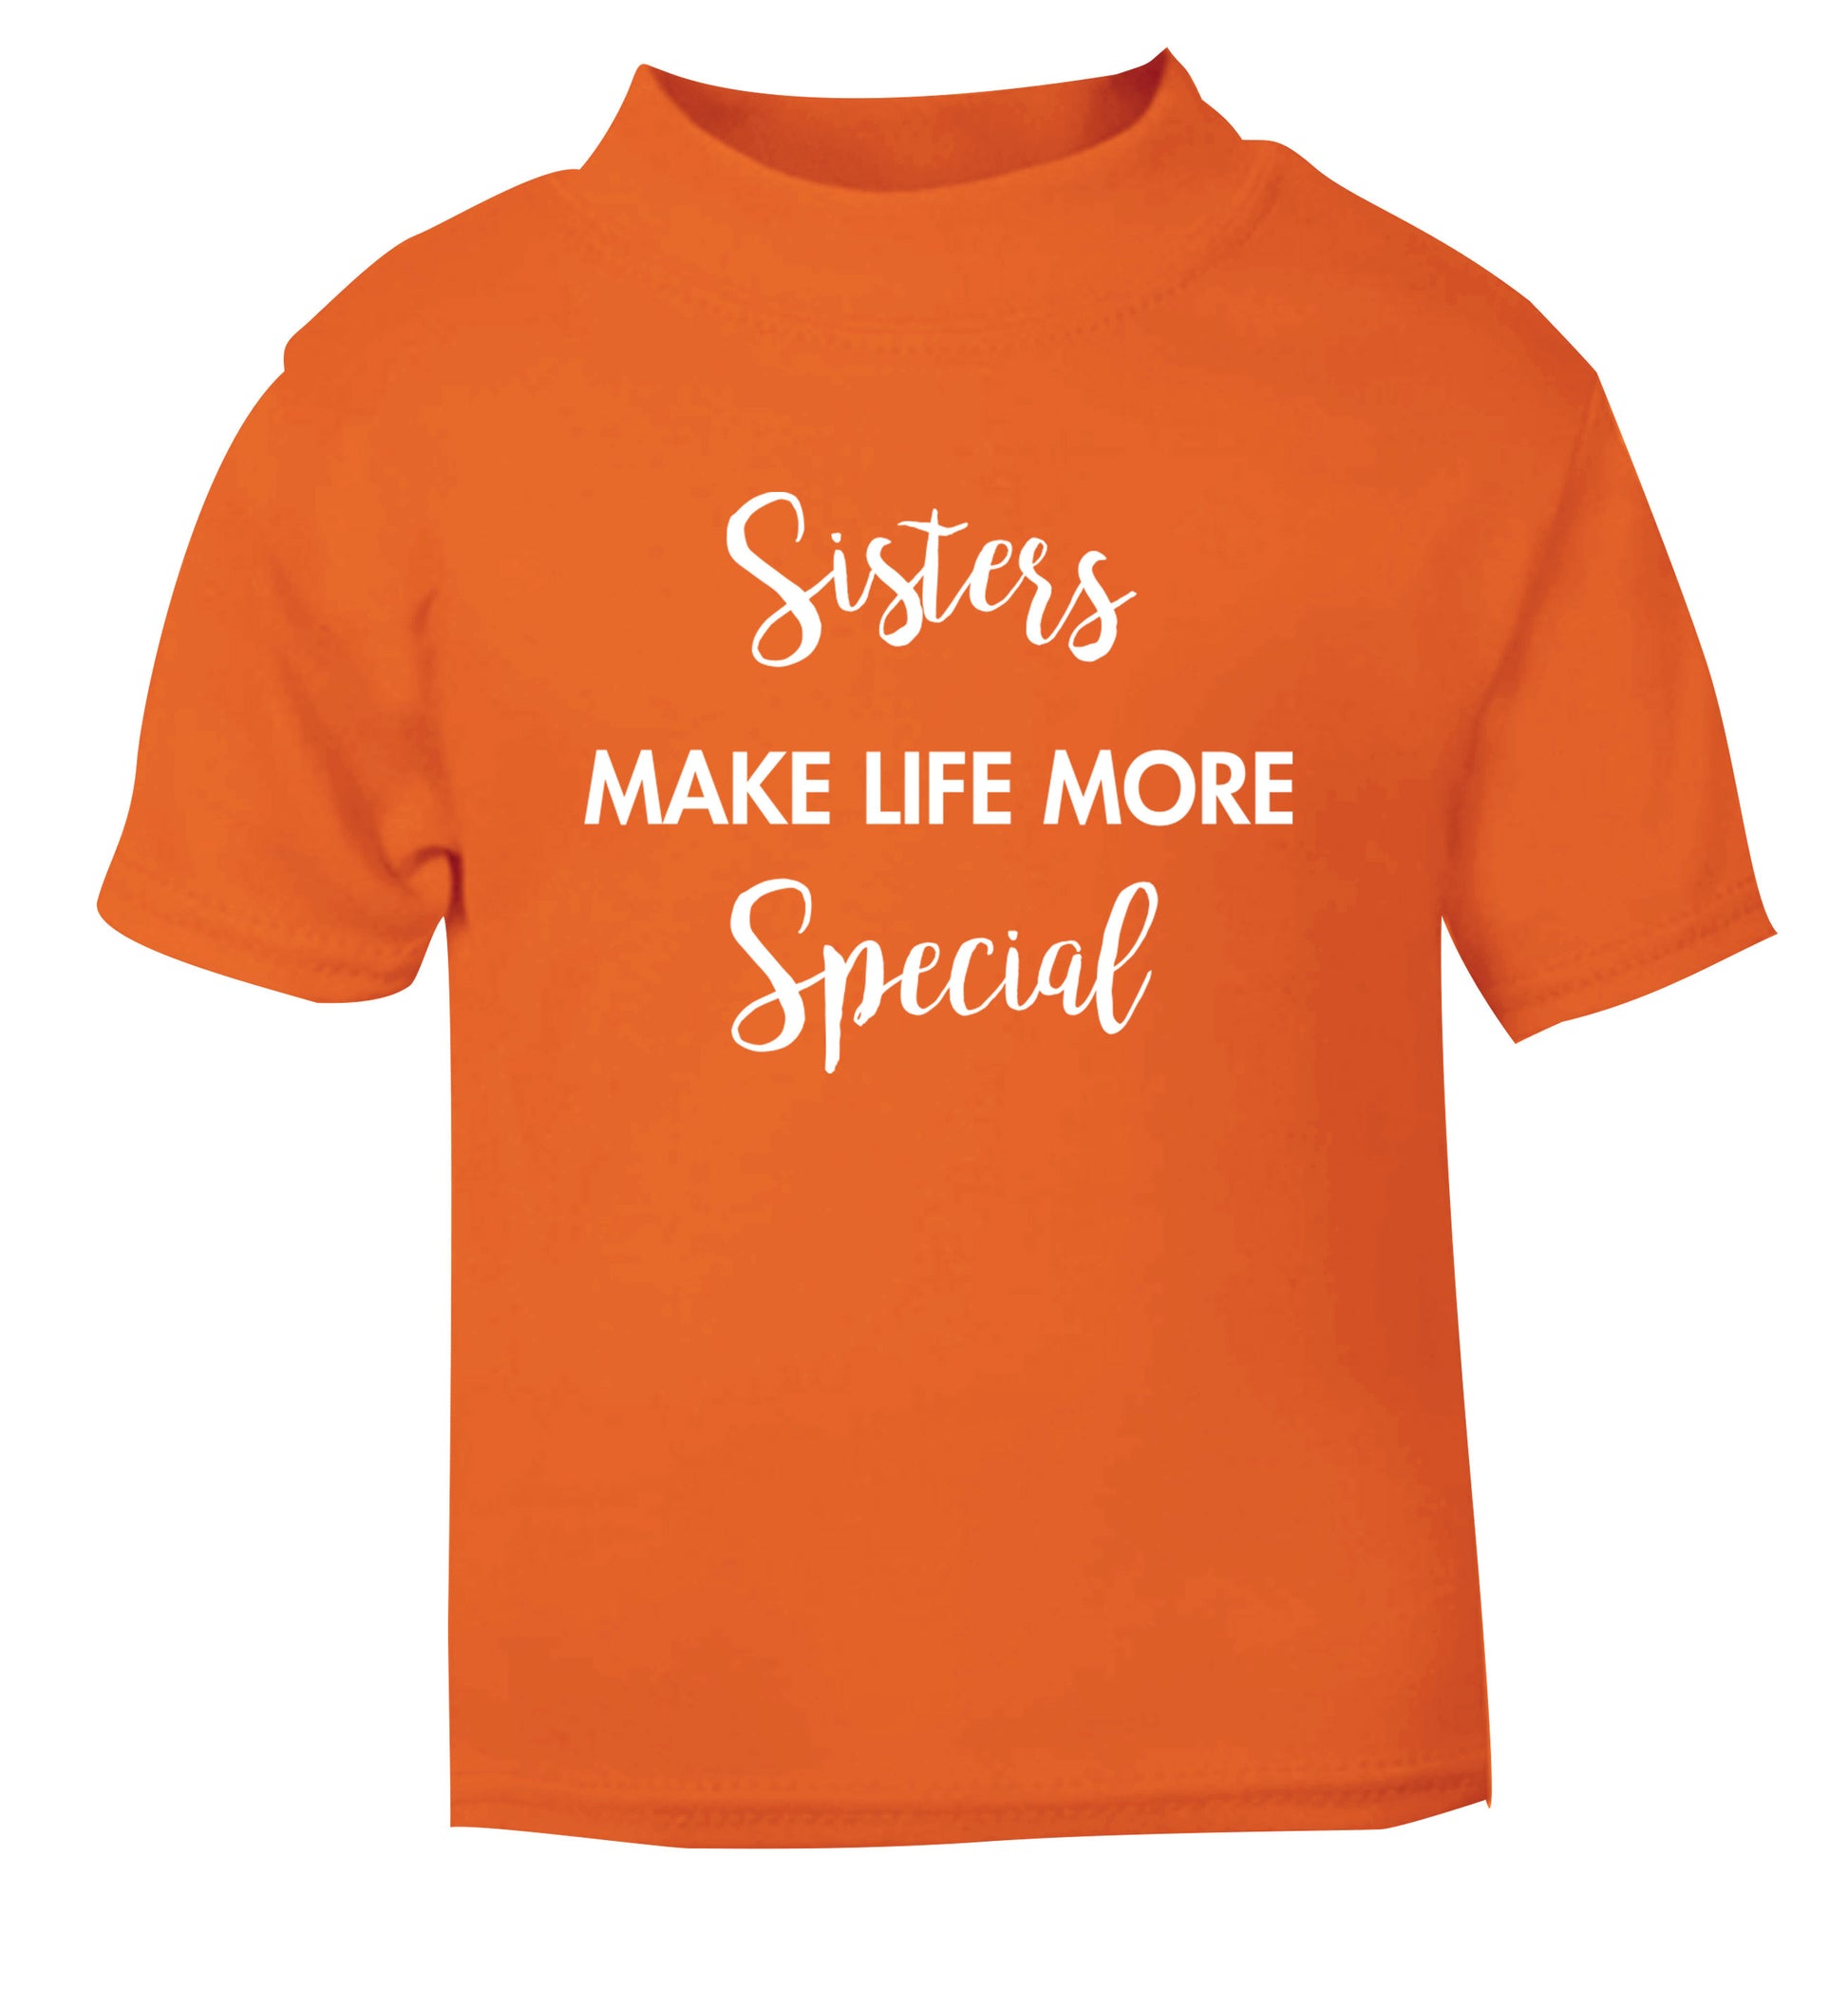 Sisters make life more special orange Baby Toddler Tshirt 2 Years